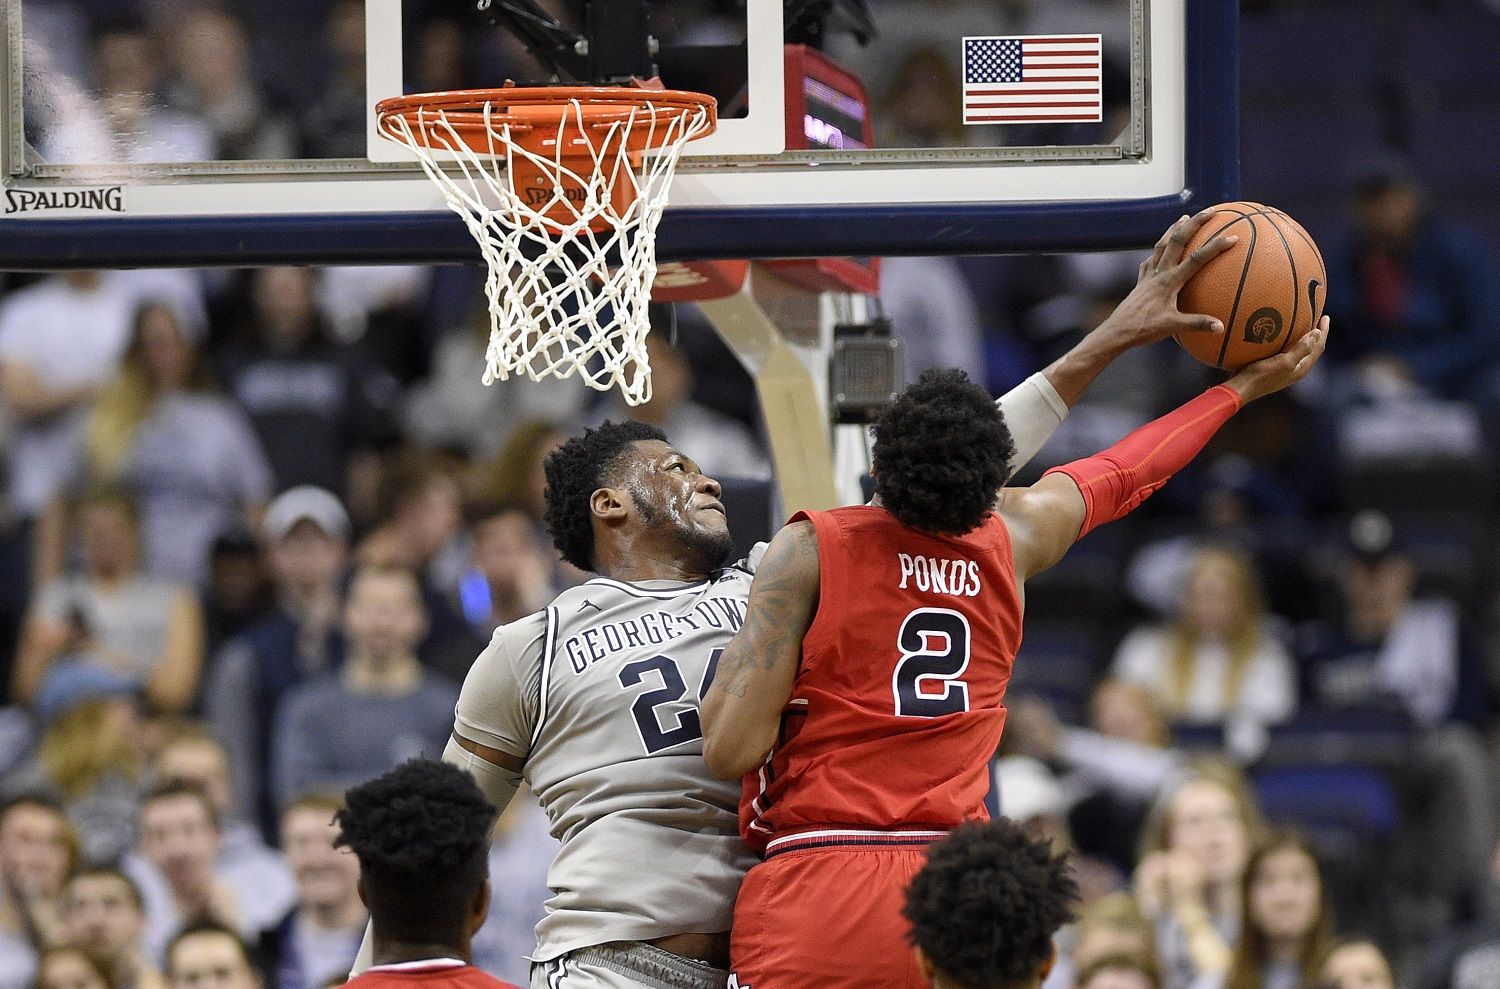 Georgetown forward Marcus Derrickson (24) blocks St. John's guard Shamorie Ponds (2) during the first overtime of an NCAA college basketball game, Saturday, Jan. 20, 2018, in Washington. Georgetown won 93-89 in double overtime. (AP Photo/Nick Wass)